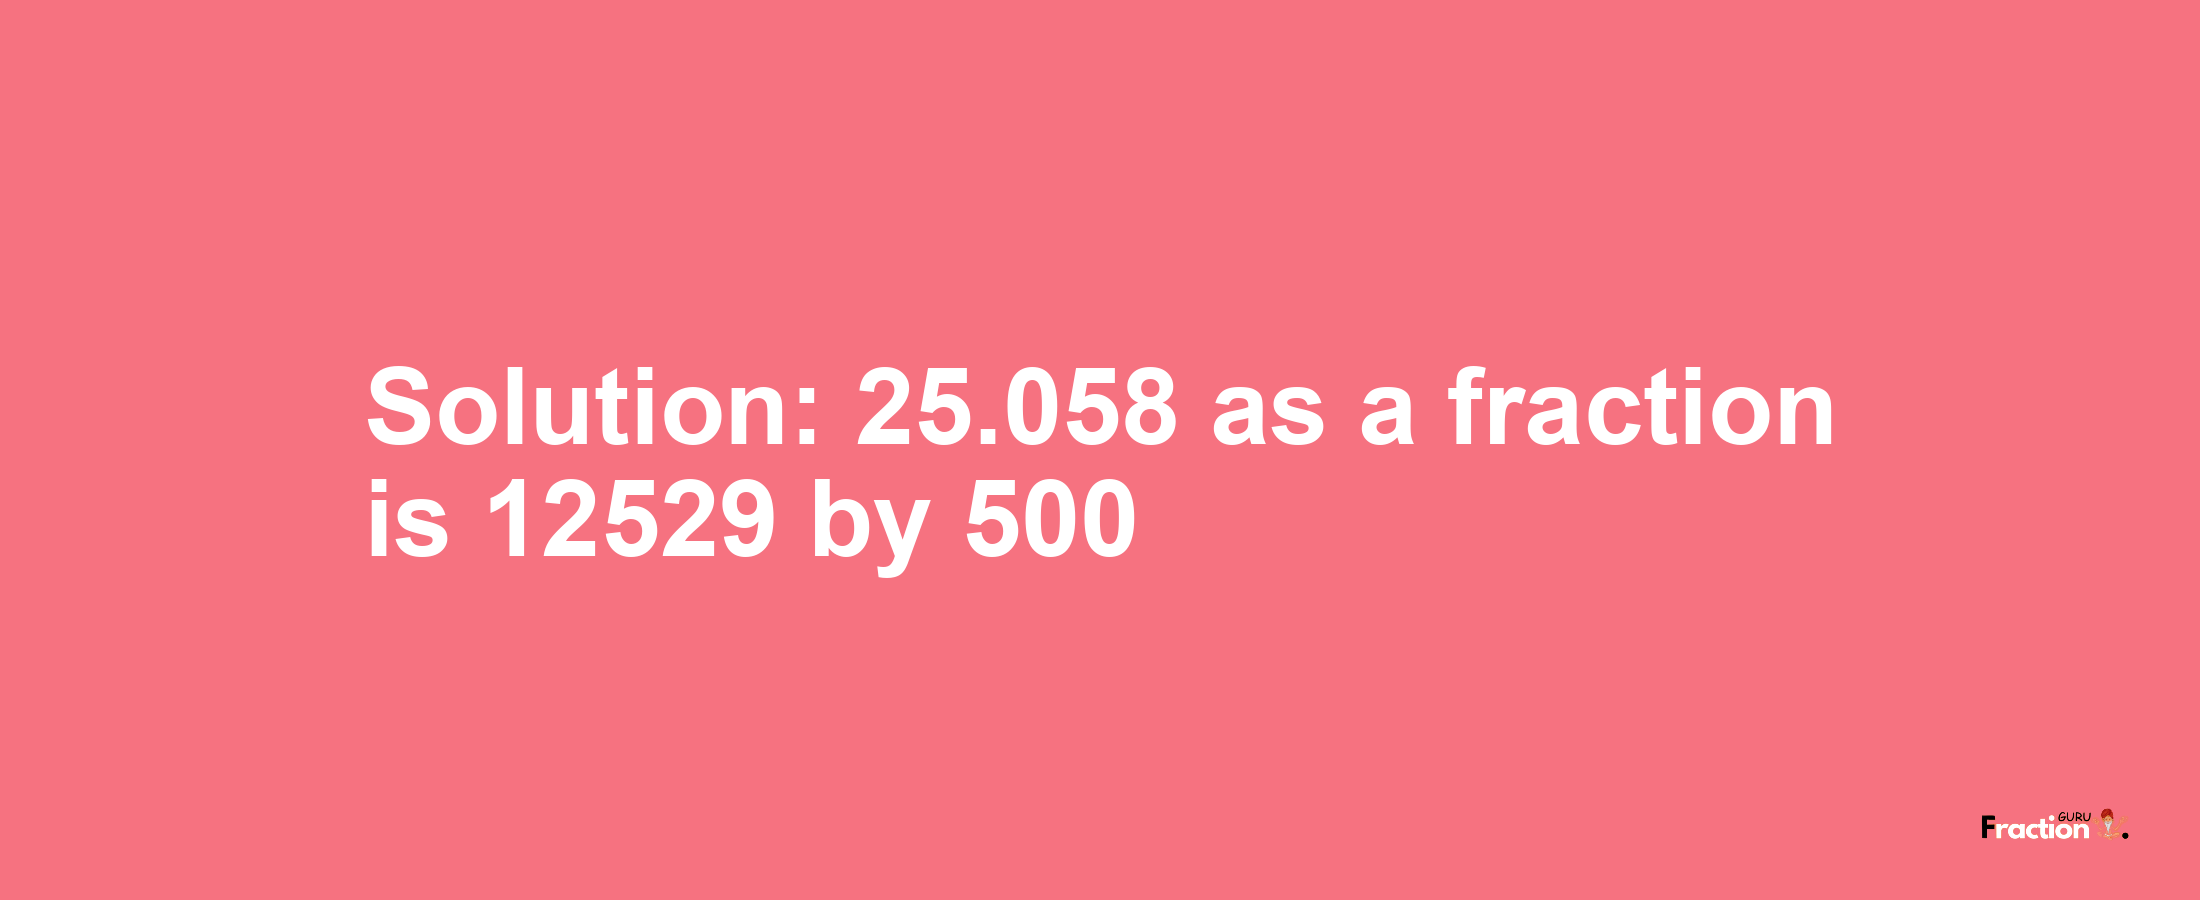 Solution:25.058 as a fraction is 12529/500